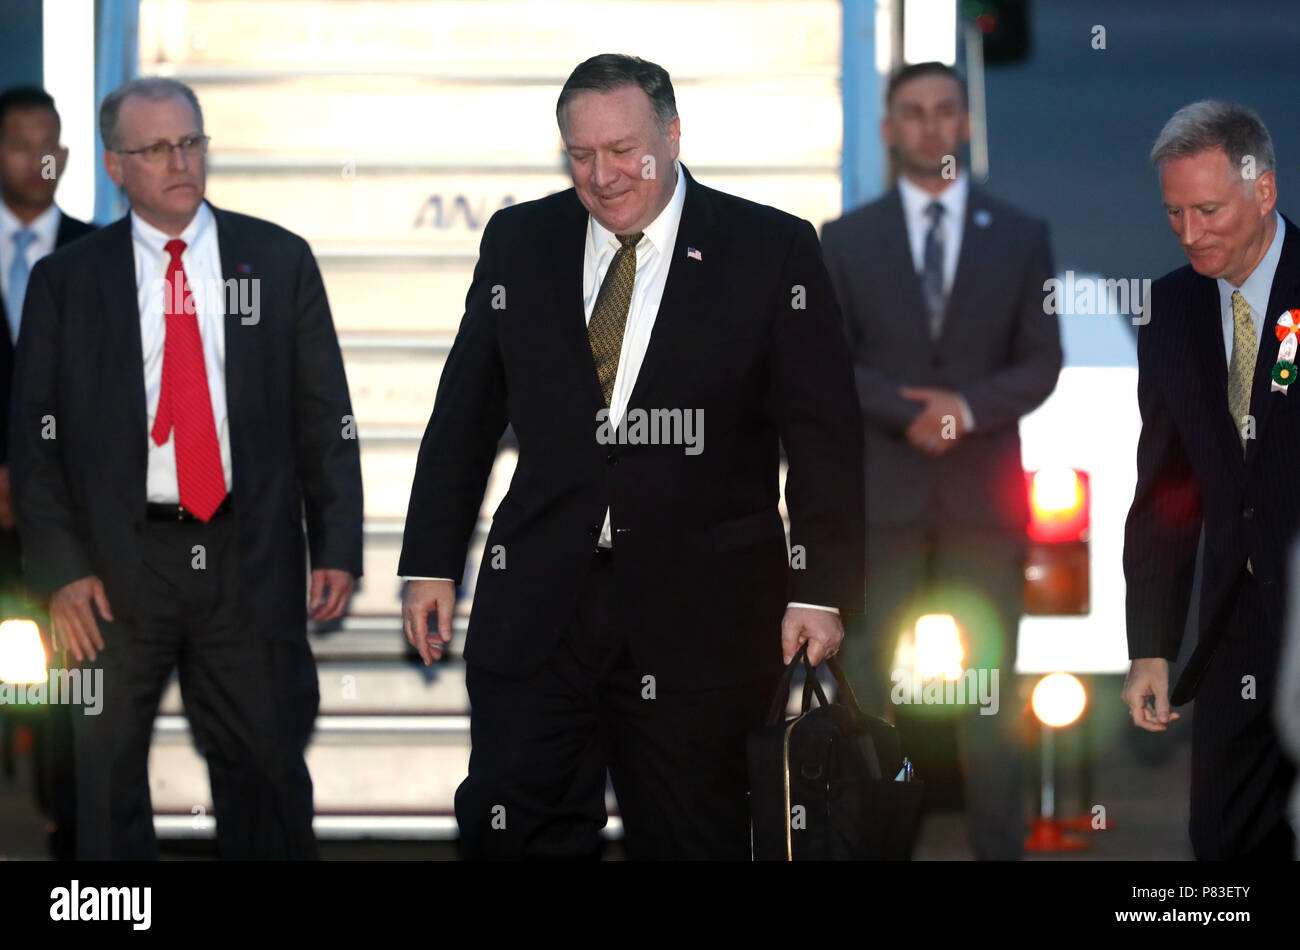 Tokyo, Japan. 7th July, 2018. United States Secretary of State Mike Pompeo arrives at the Tokyo International Airport from Pyongyang on Saturday, July 7, 2018. Pompeo spent a day in Pyongyang and will have meeting with Japanese and South Korean counterparts in Tokyo. Credit: Yoshio Tsunoda/AFLO/Alamy Live News Stock Photo